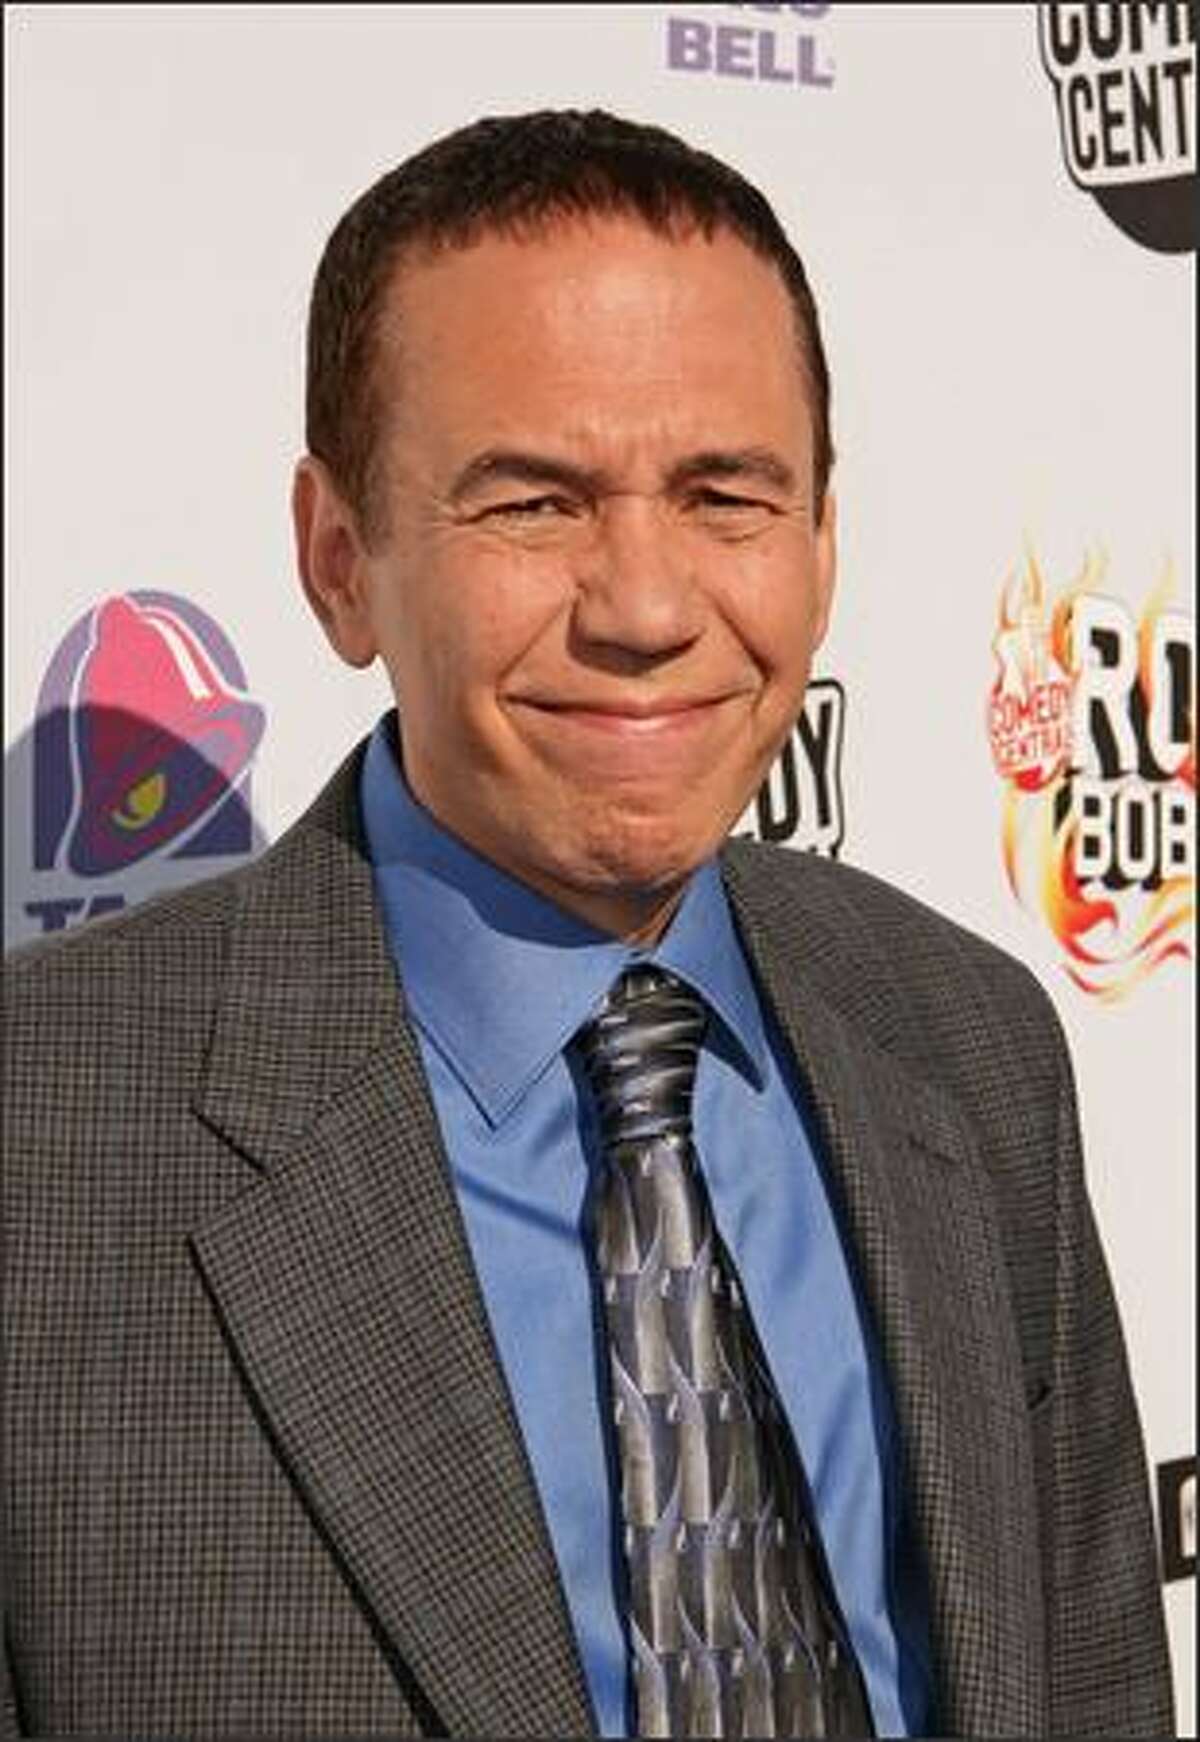 Comedian Gilbert Gottfried arrives to "Comedy Central Roast Of Bob Saget" at the Warners Brothers Studio Lot in Burbank, California.